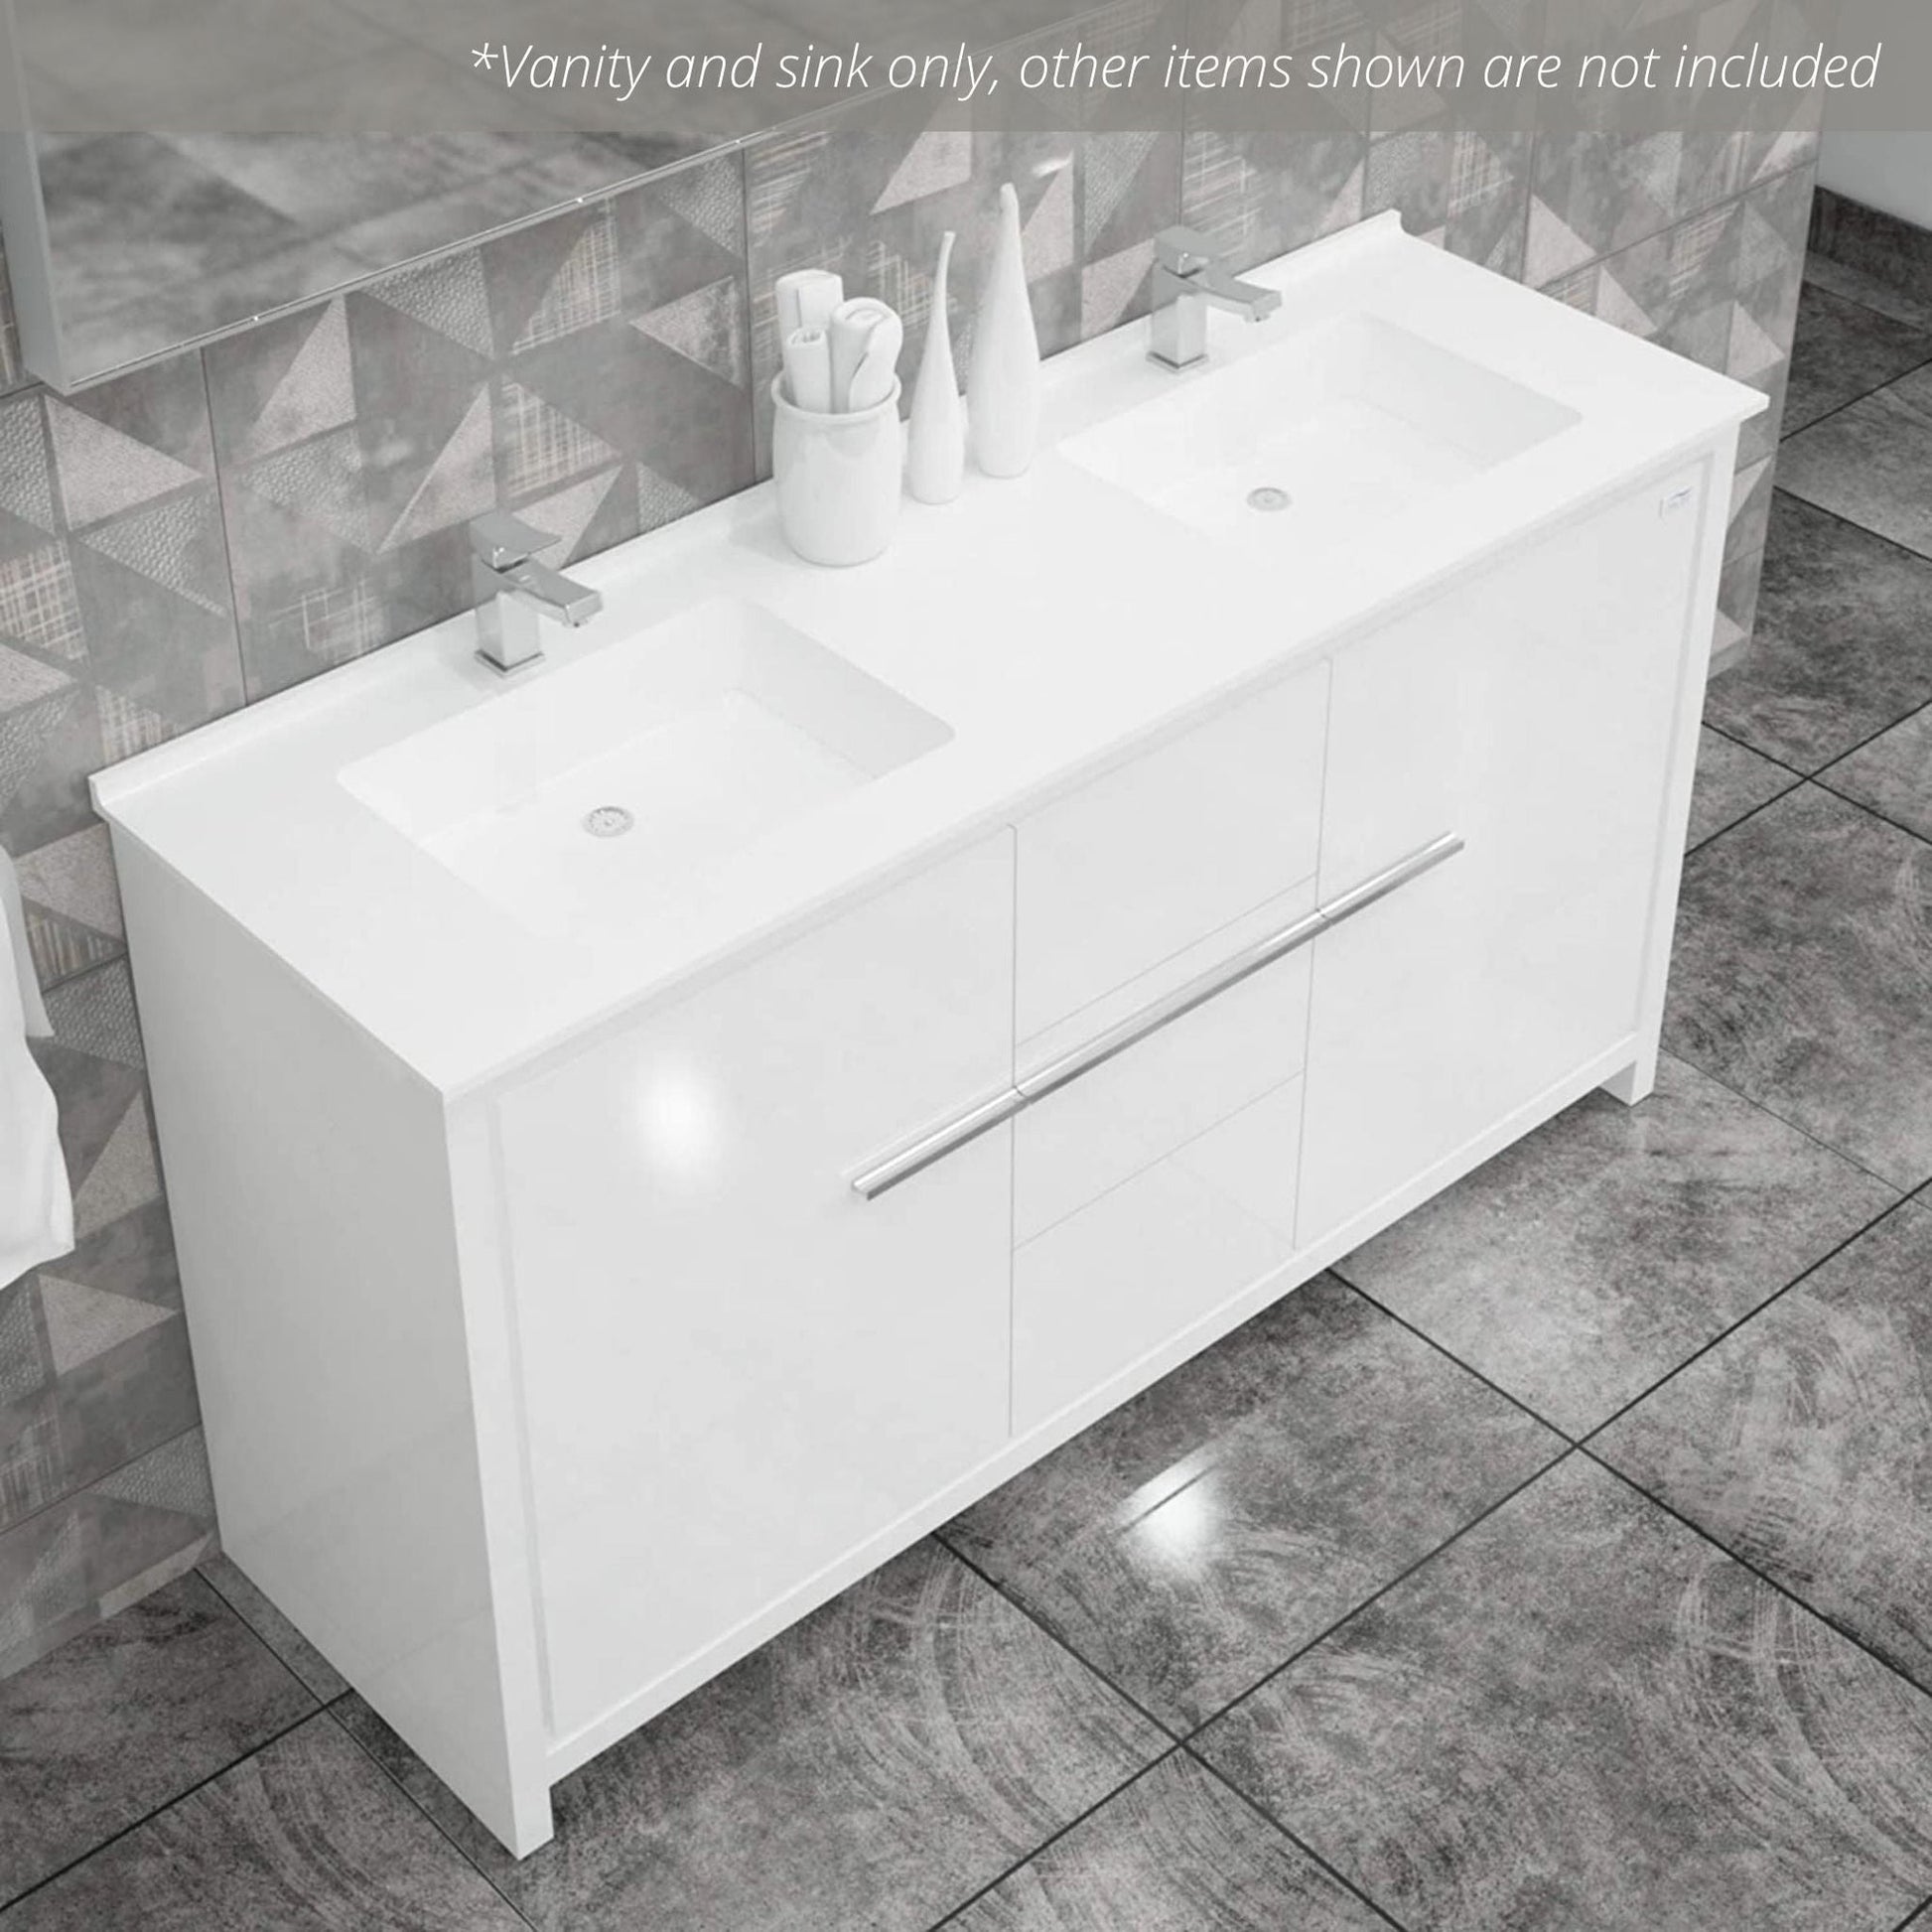 Casa Mare Alessio 60" Glossy White Bathroom Vanity and Acrylic Double Sink Combo With LED Mirror